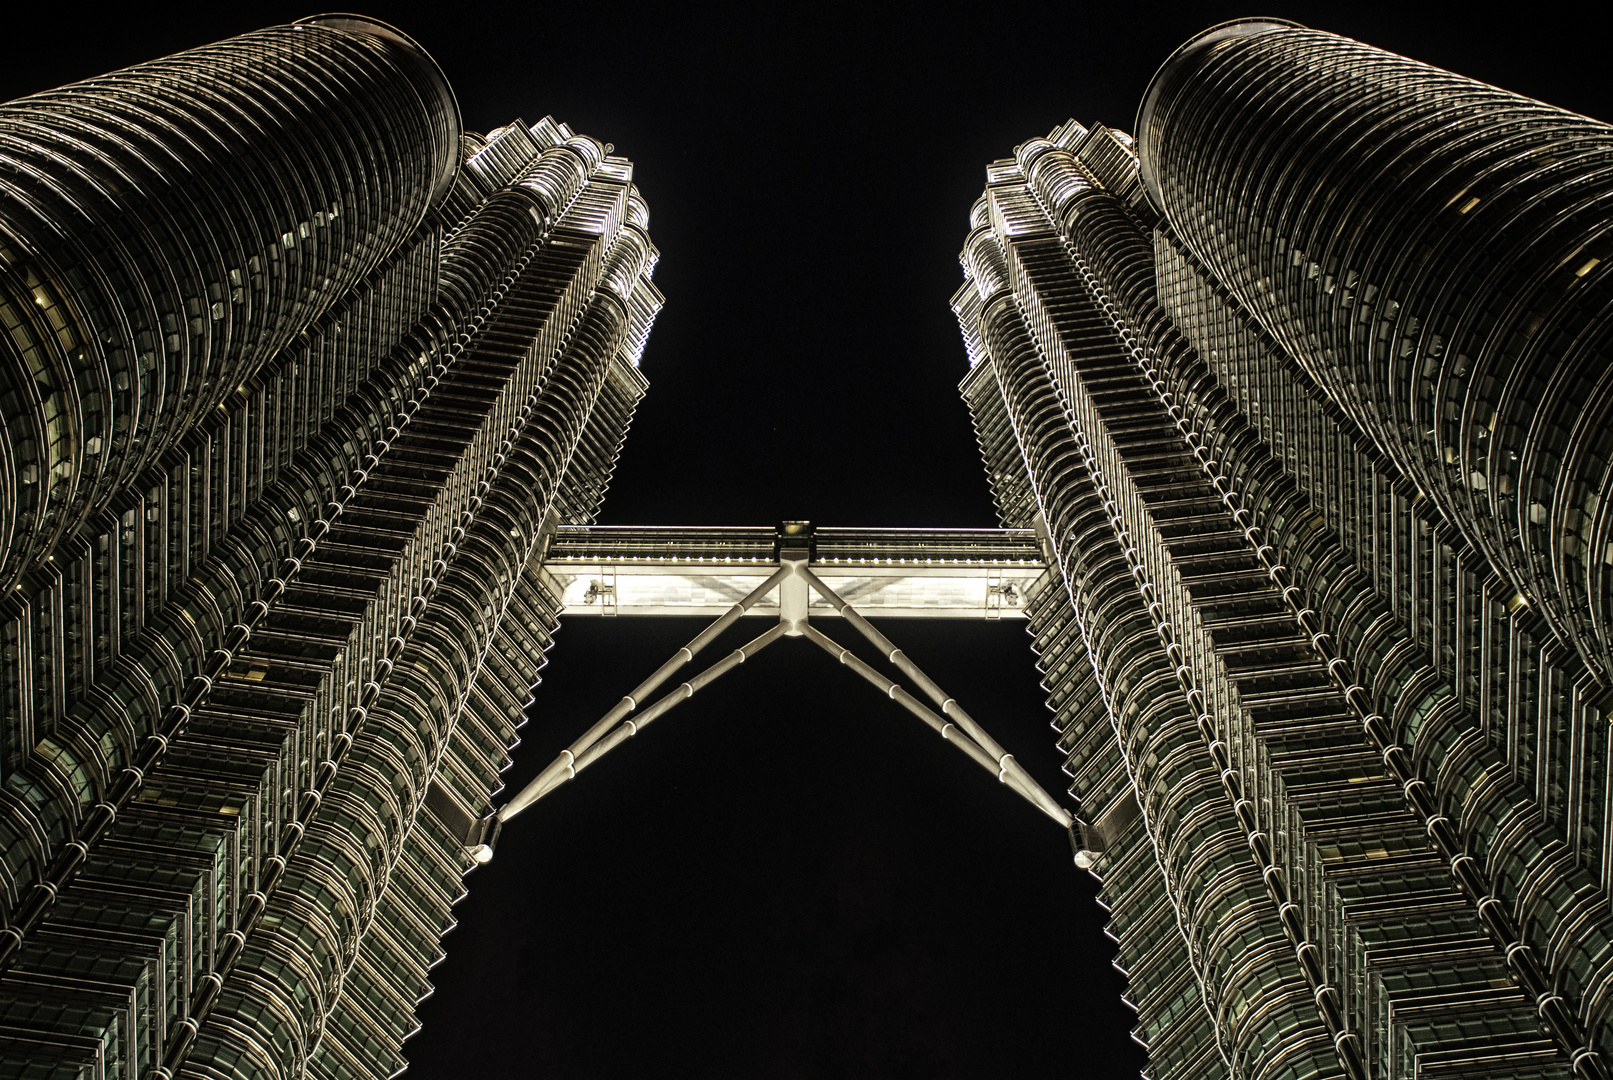 Part of the Petronas Towers